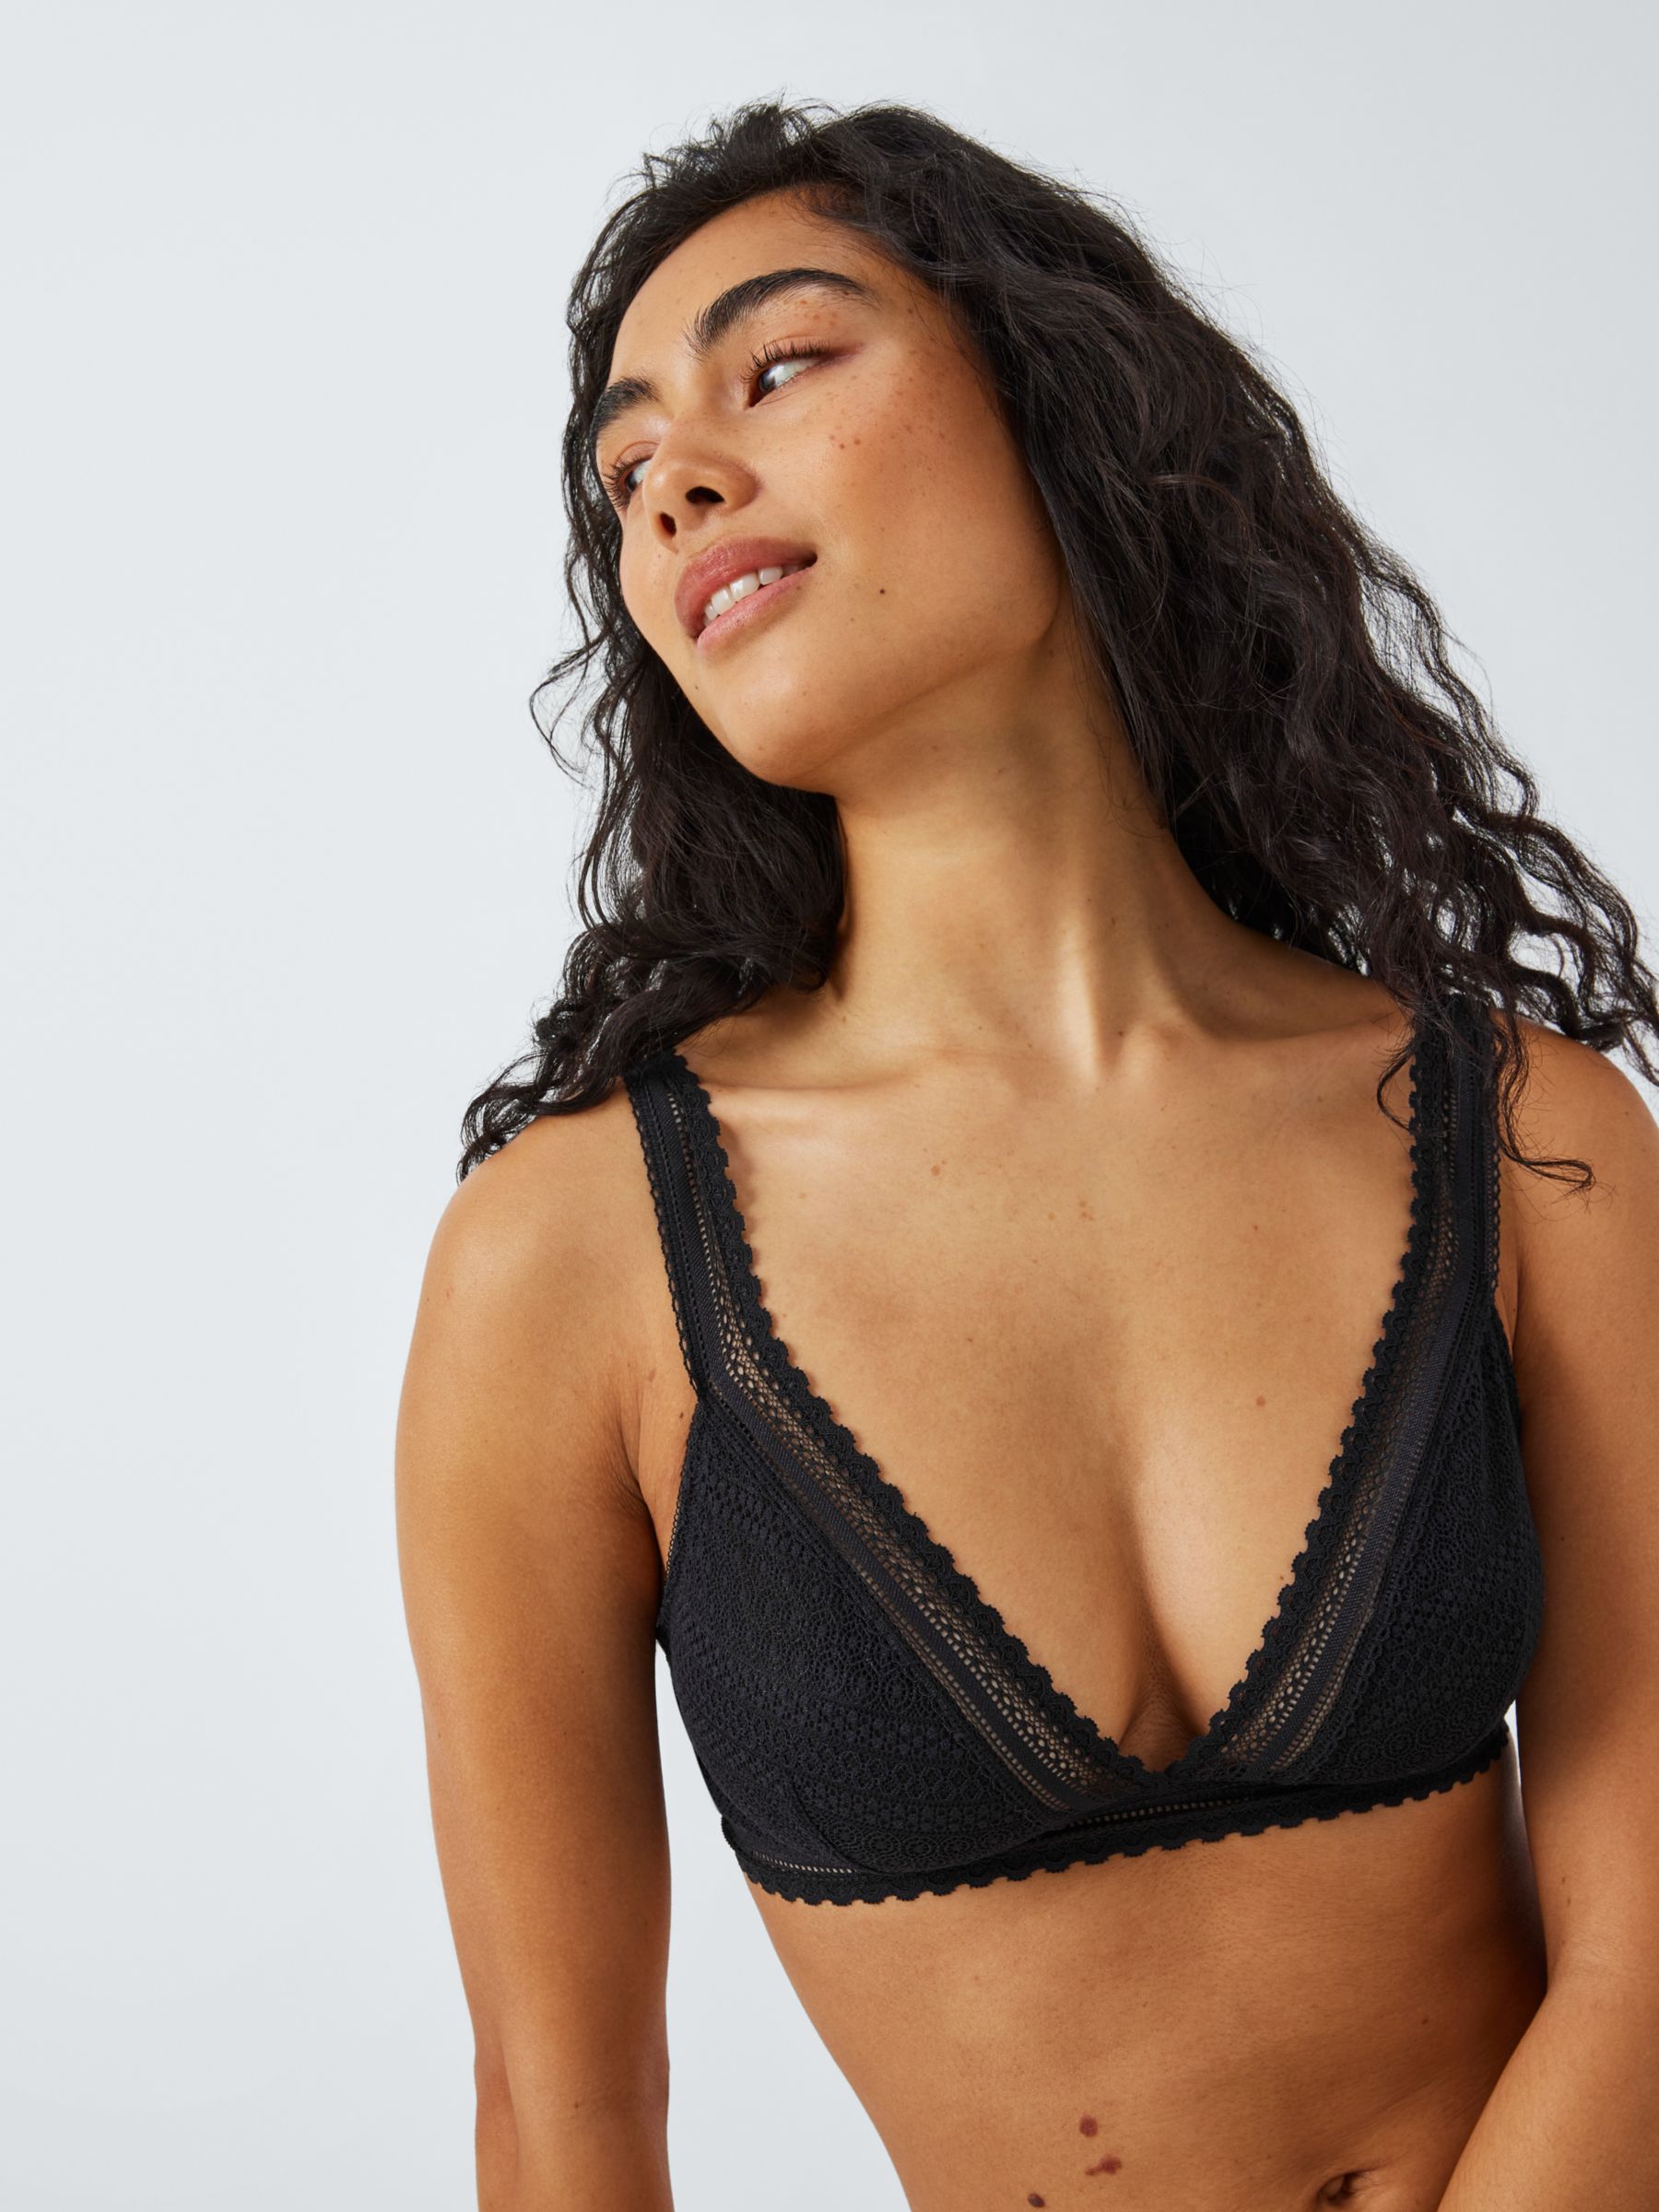 John Lewis ANYDAY Lily Lace Non-Wired Bra, Black, XL